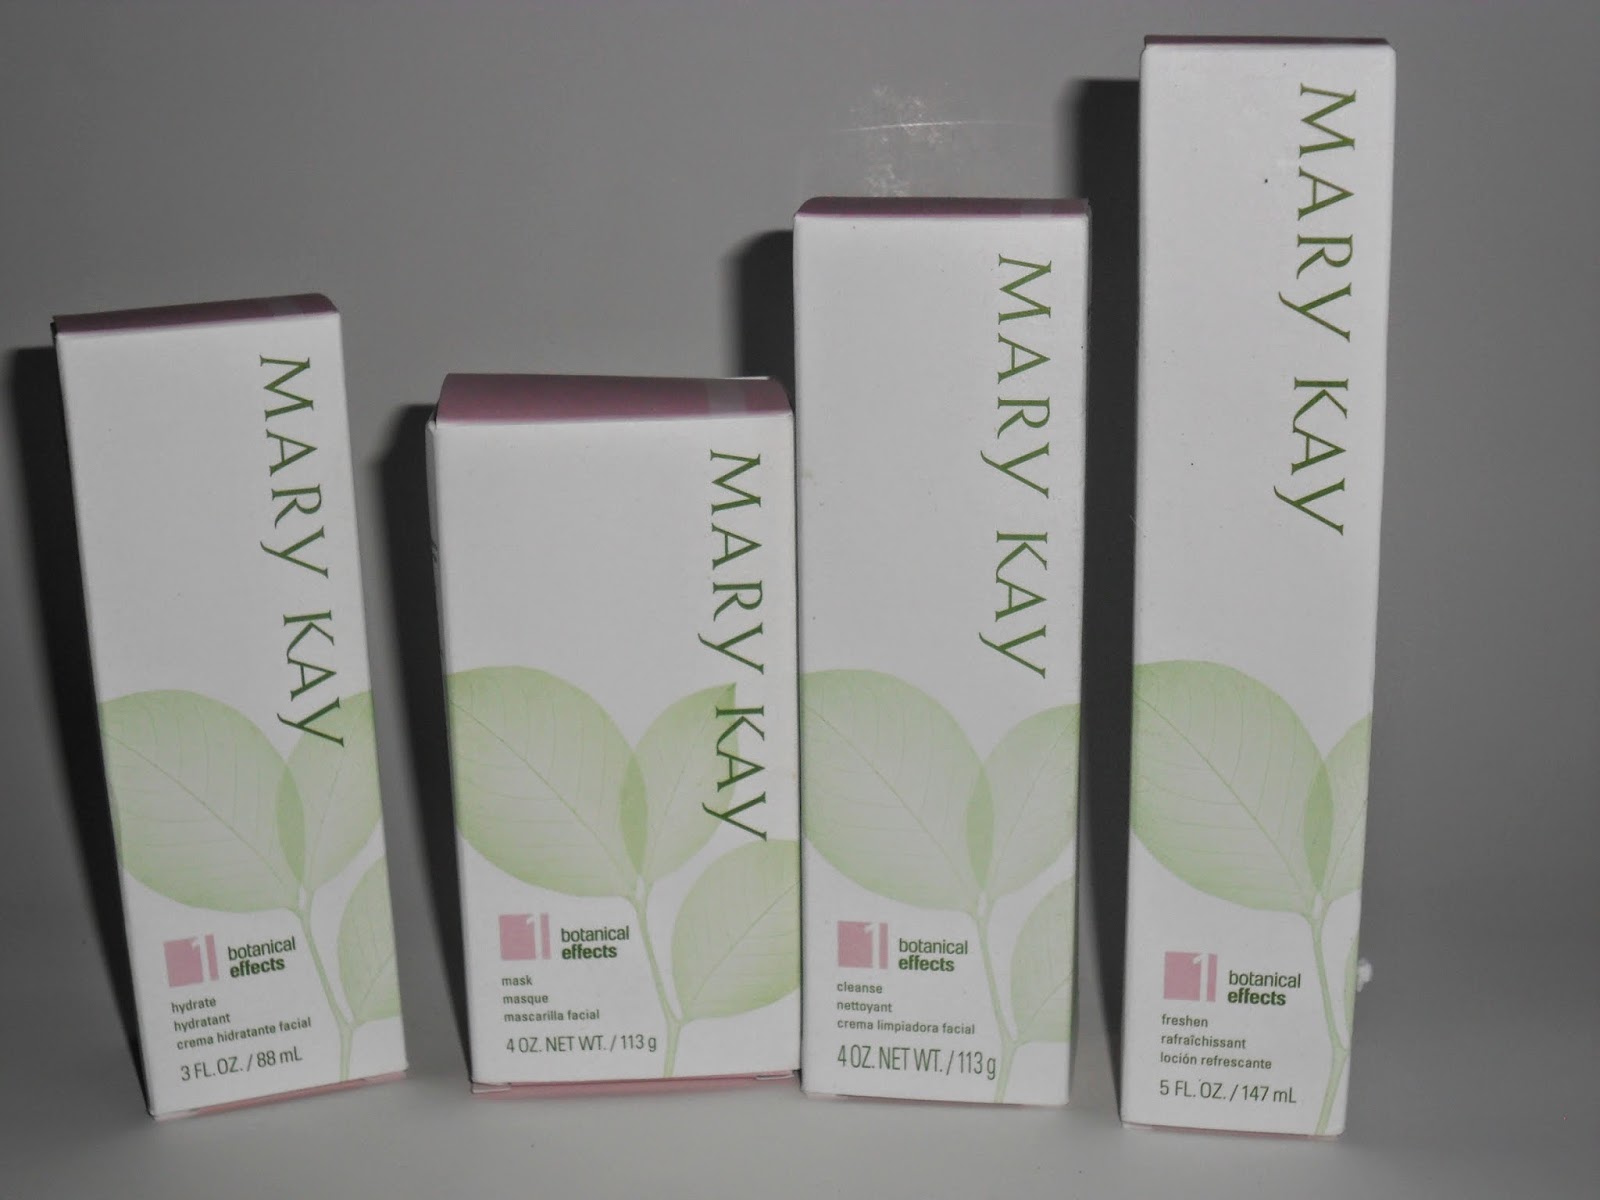 Back to nature with Botanical Effect form Mary Kay. Review